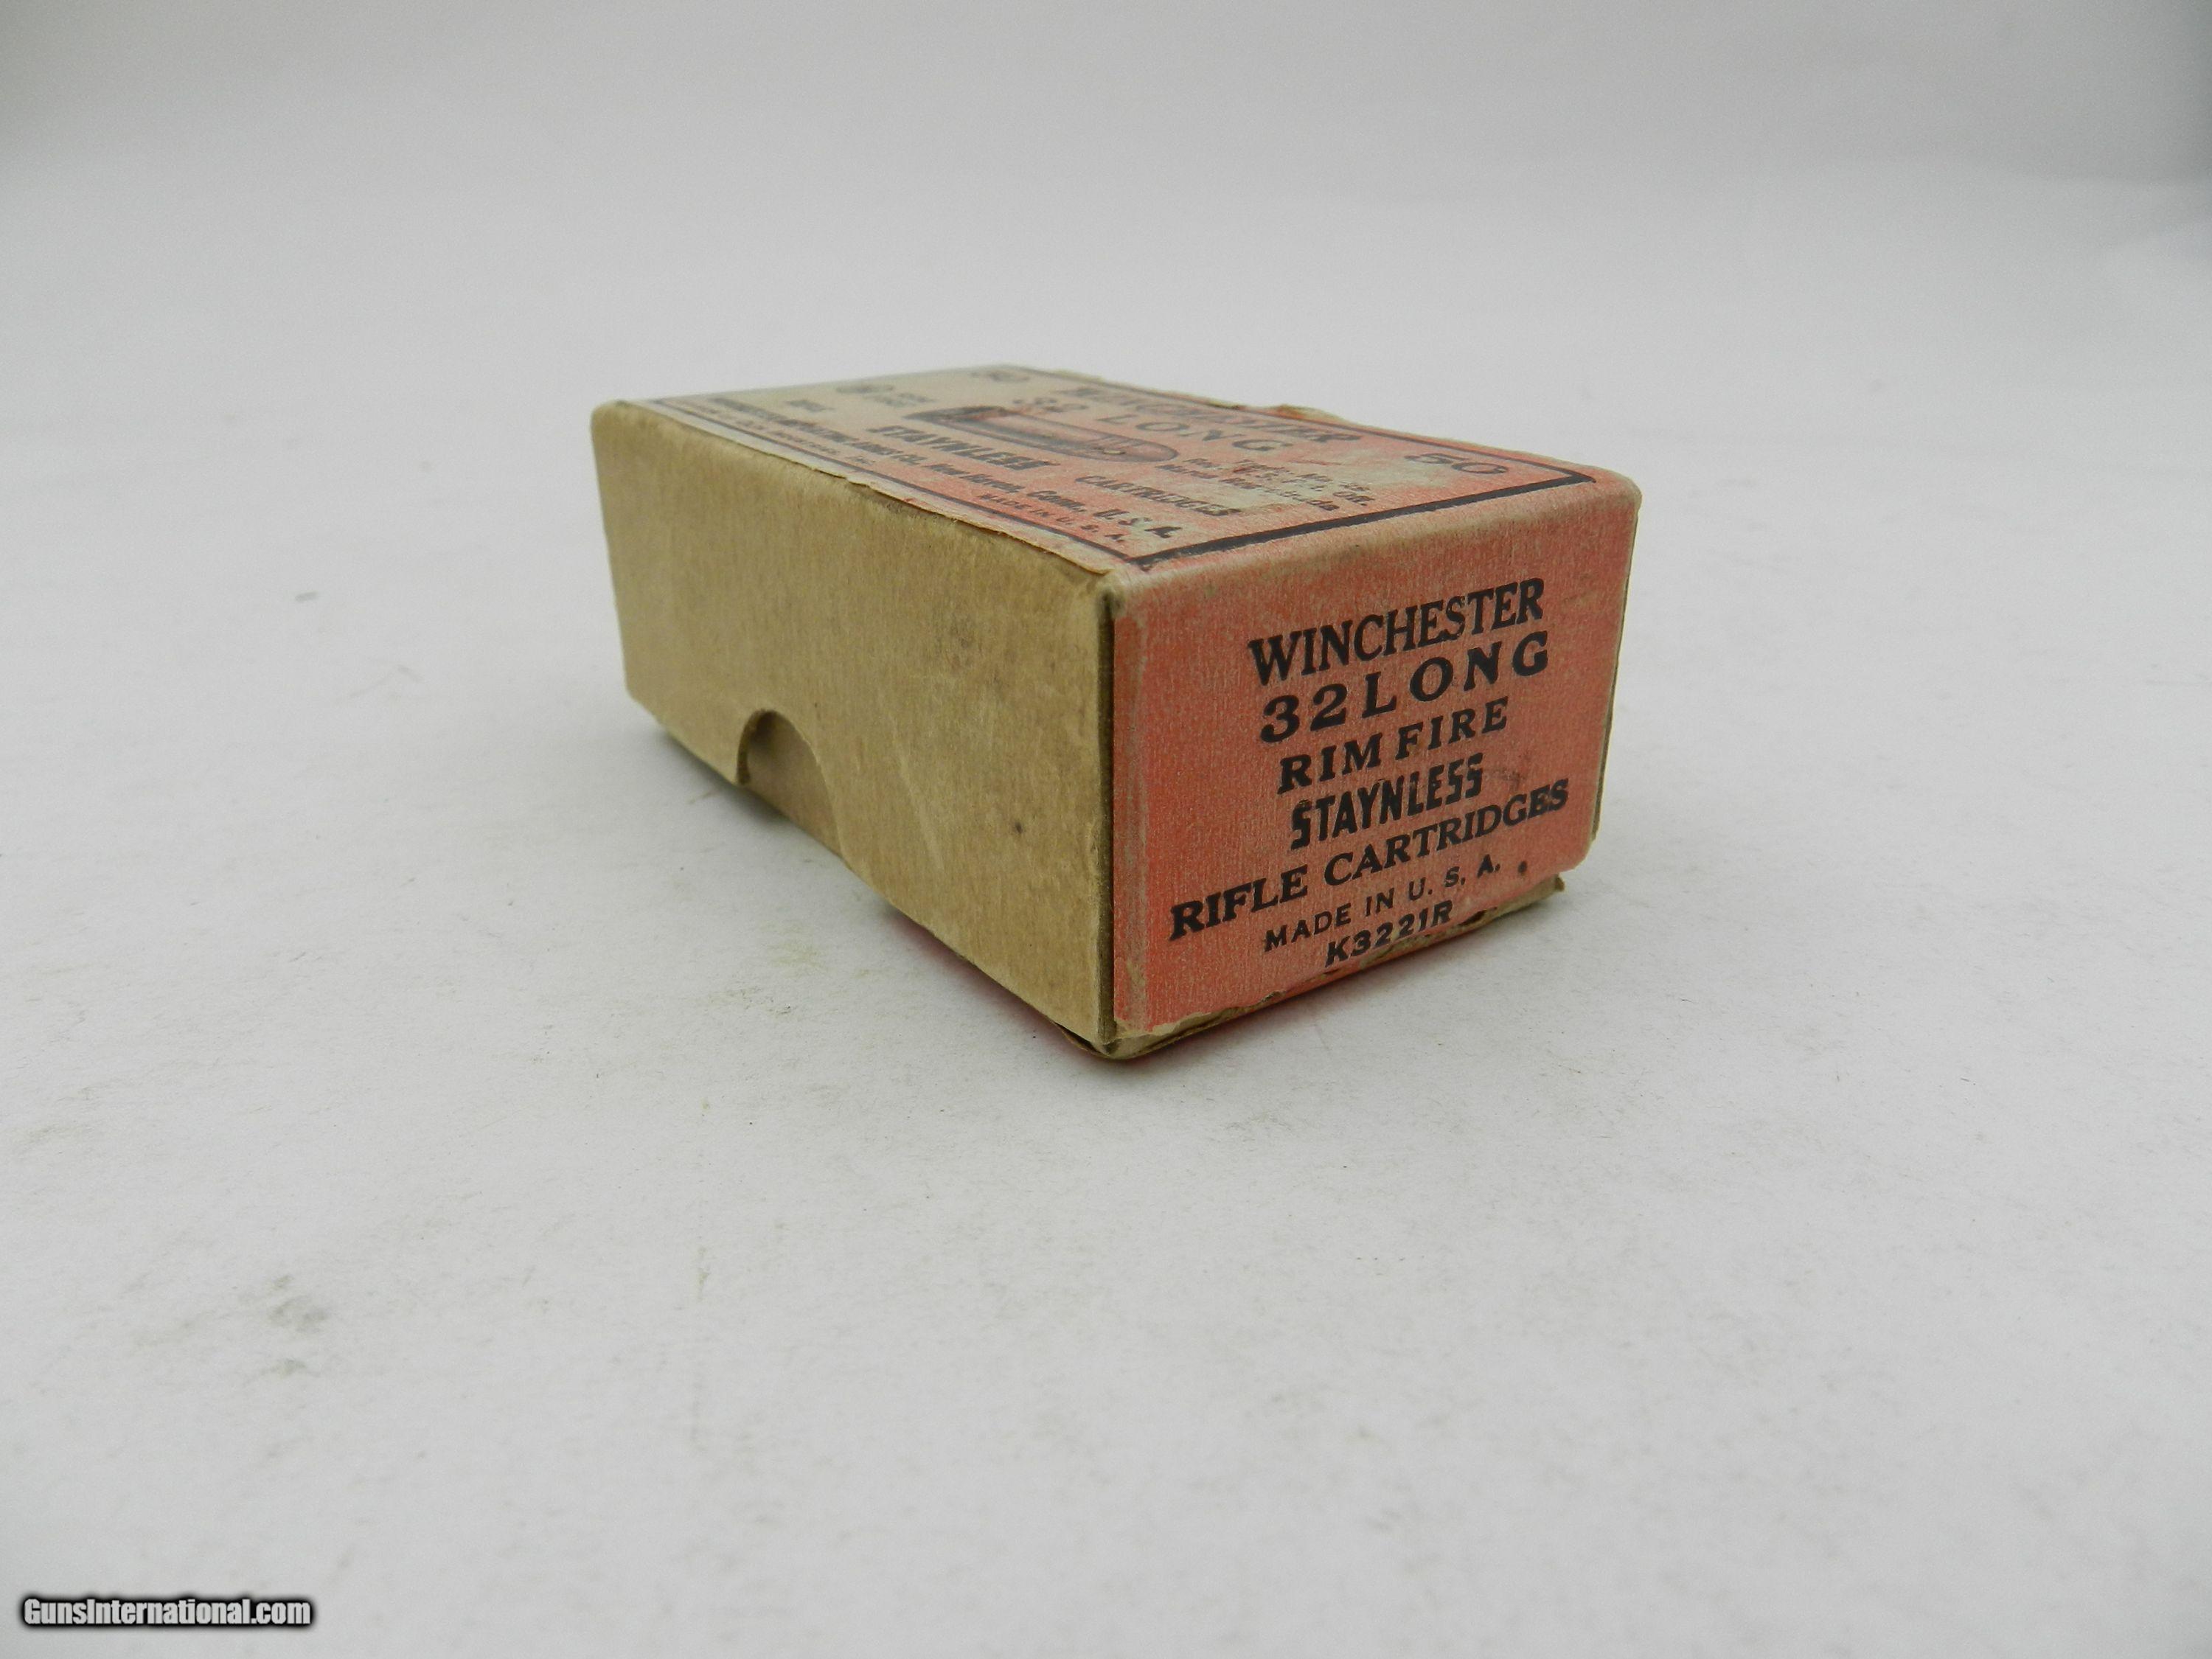 Collectible Ammo: Box of Winchester .32 Long Rim Fire Cartridges